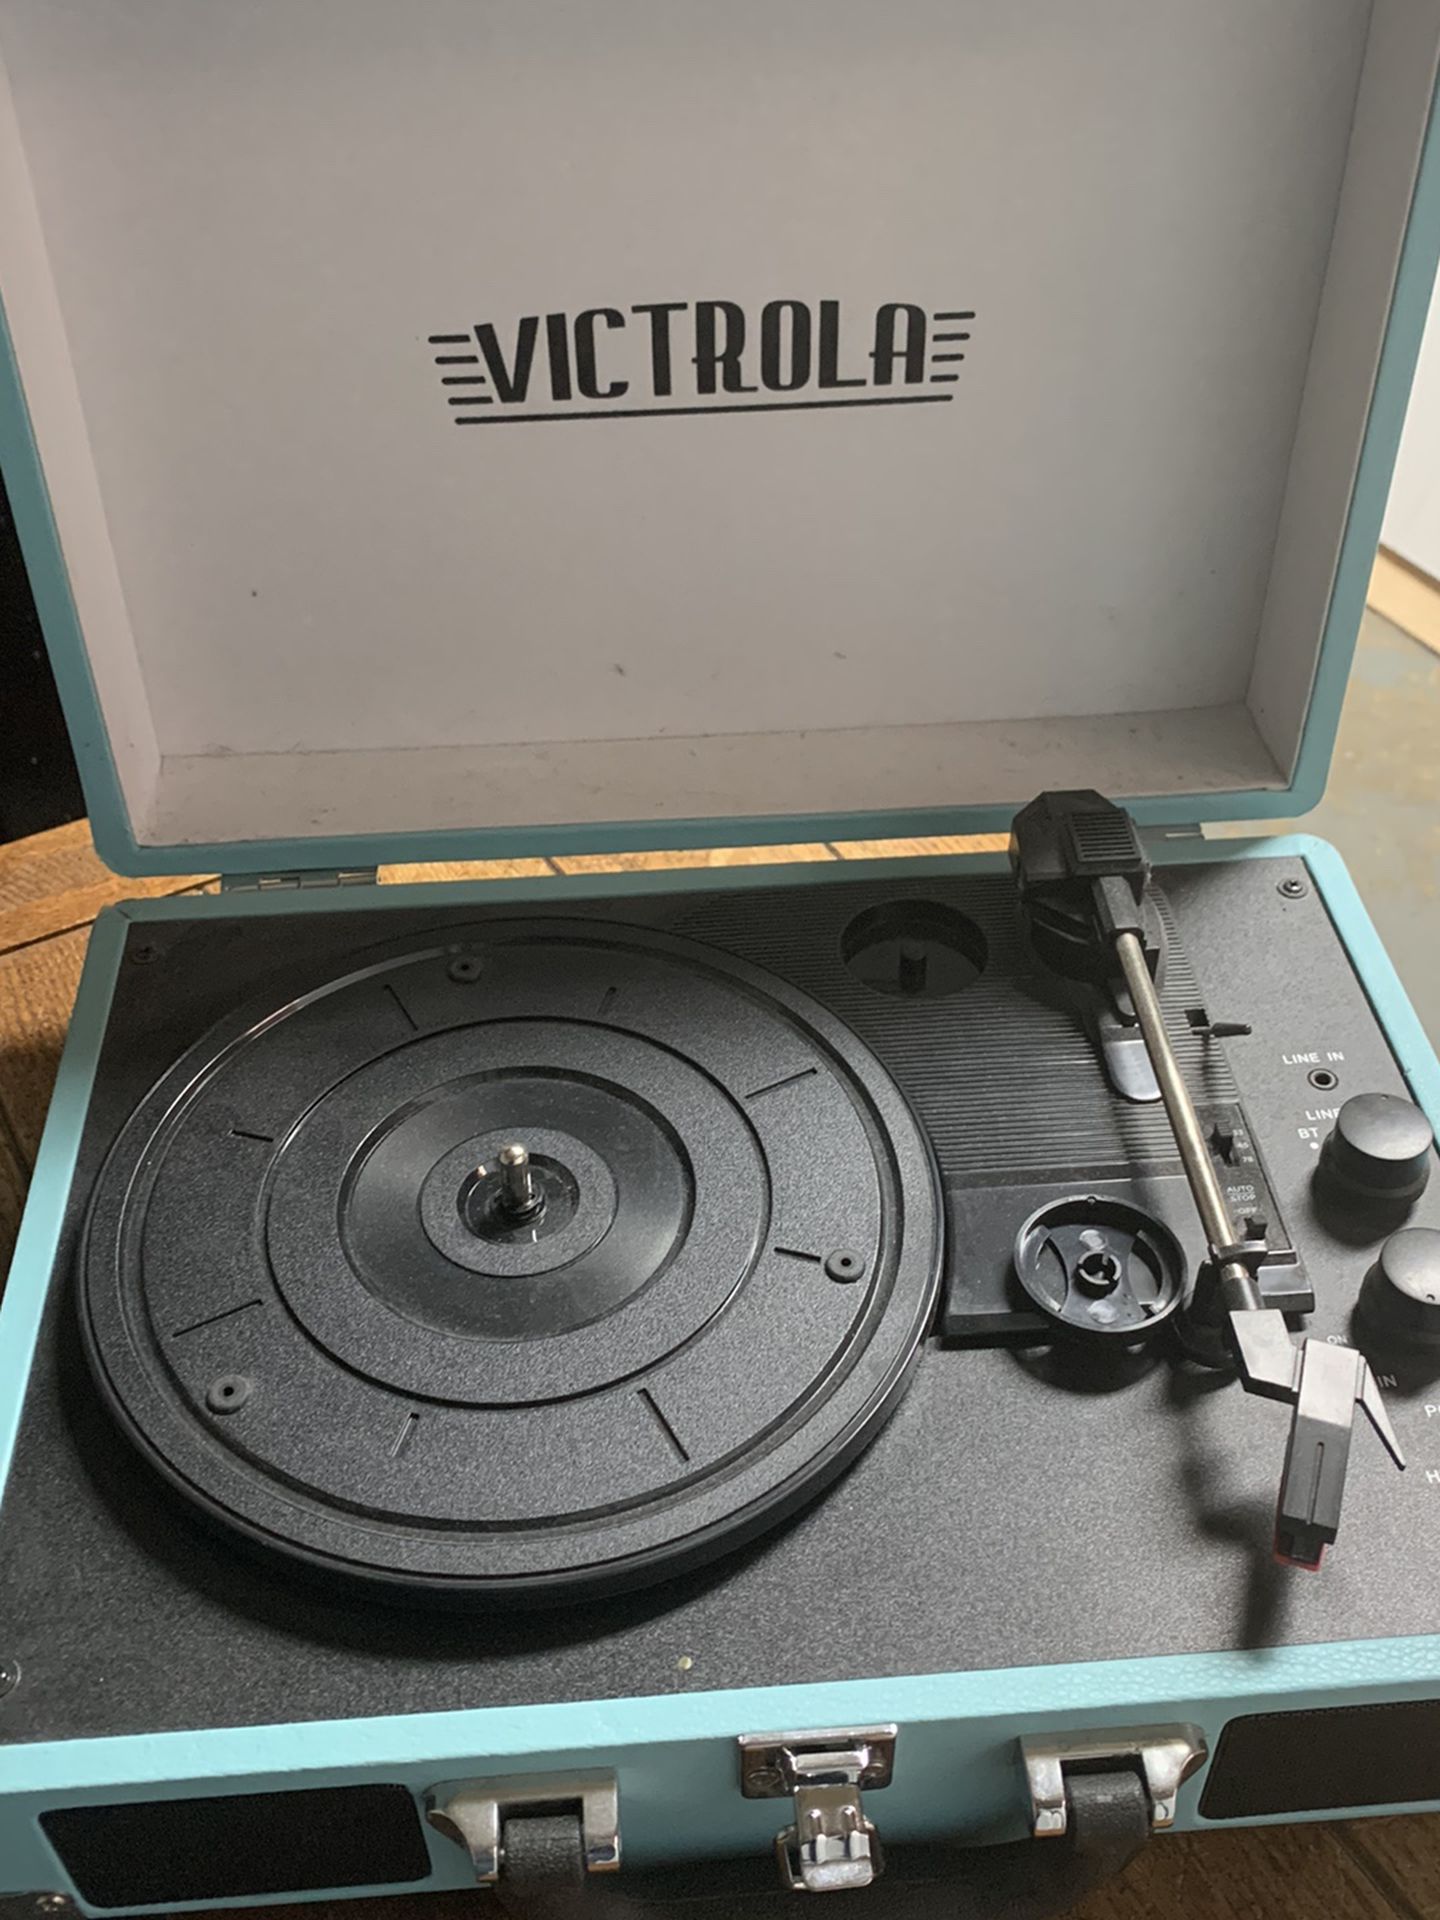 Victrola Record Player - Might Need Amplifier